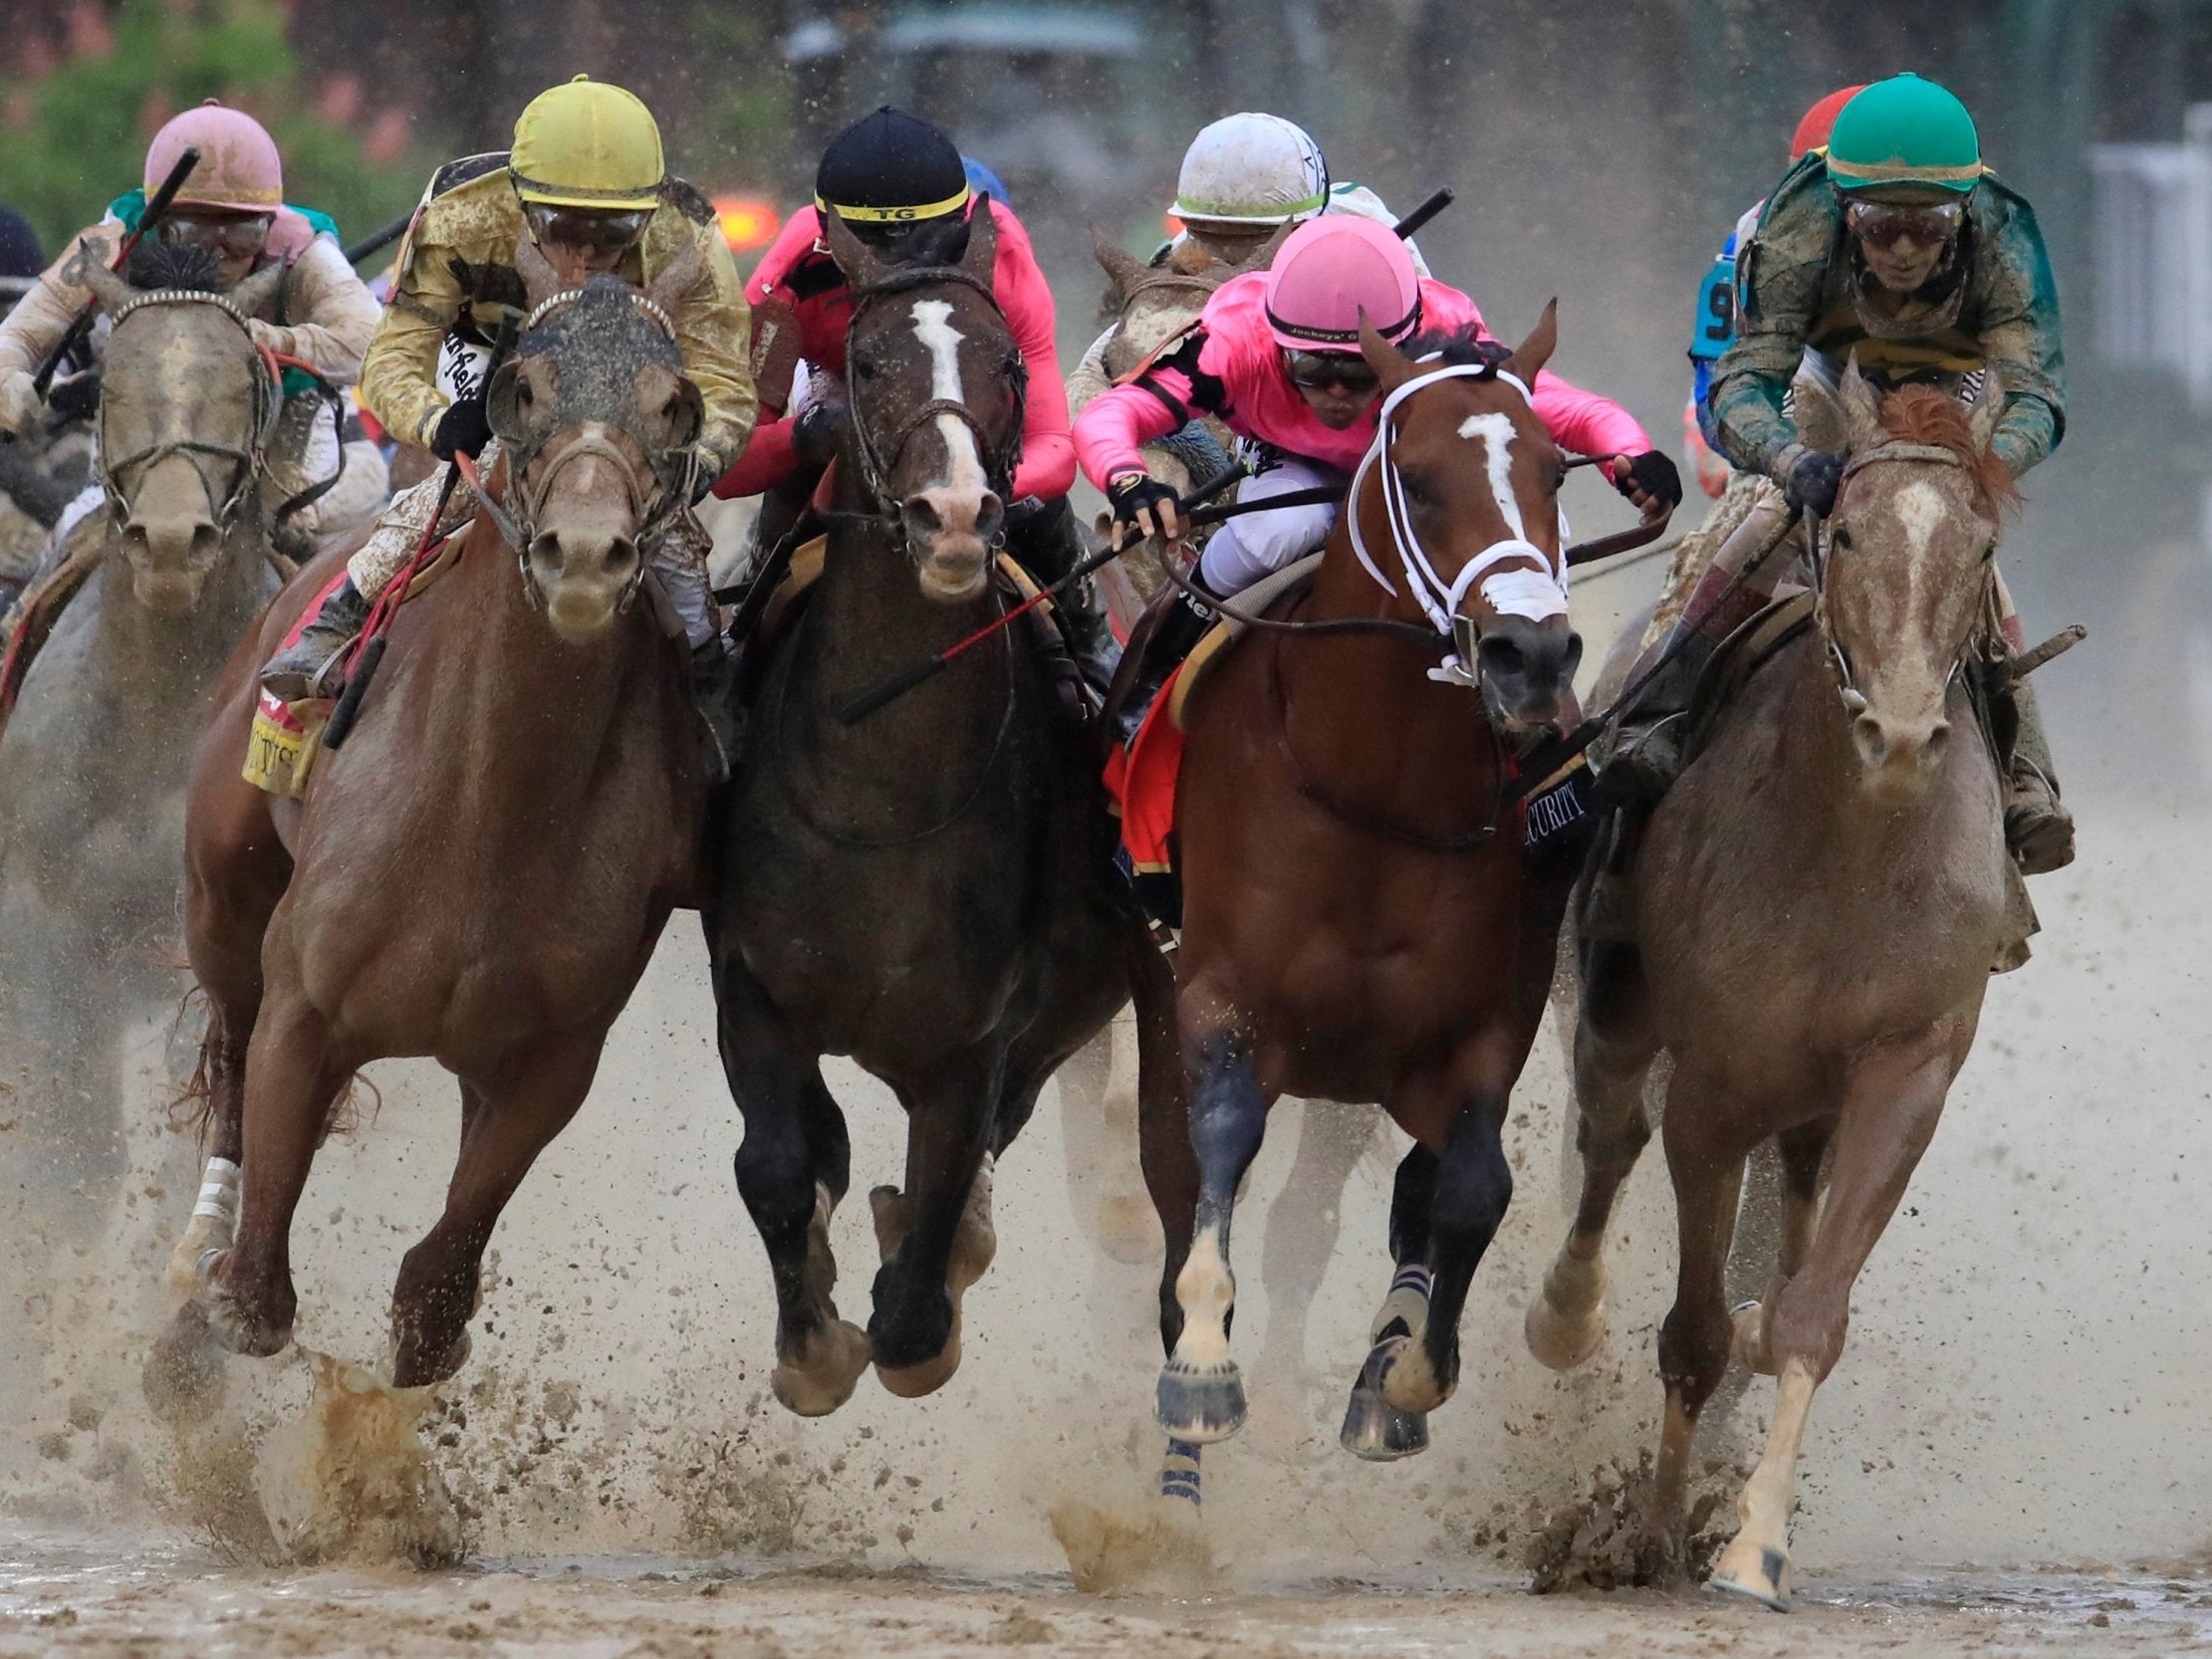 The 2019 Kentucky Derby was mired in controversy